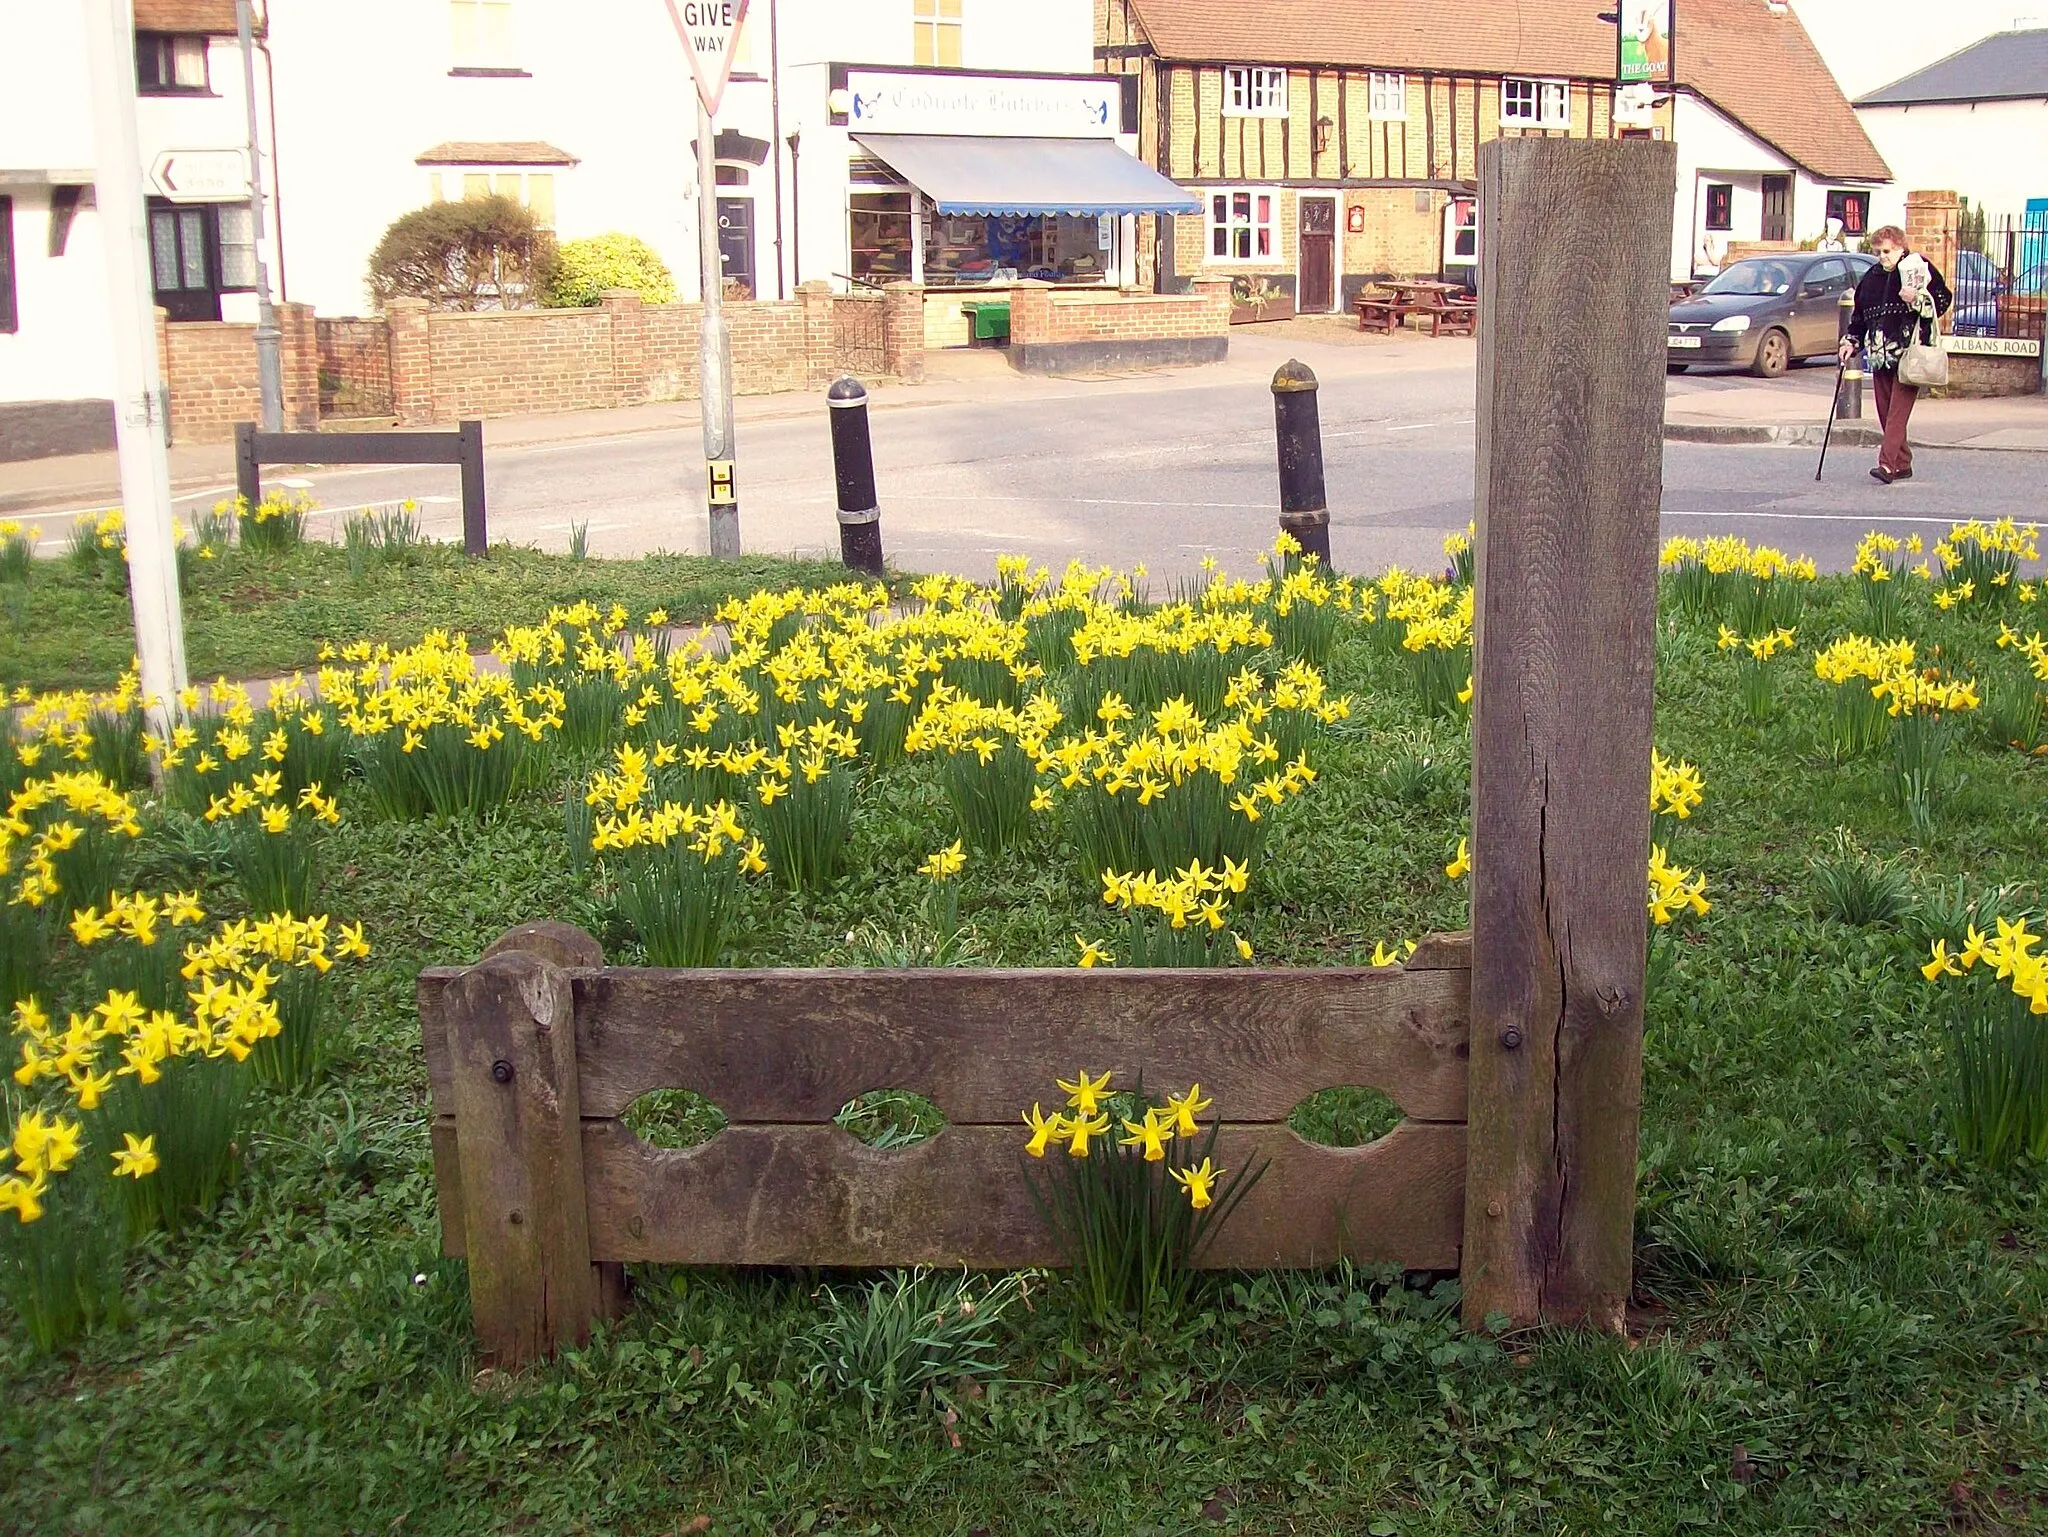 Photo showing: A set of stocks capable of shackling two people’s ankles on the village green at Codicote. Their age is unknown. Photographed 17 March 2011.

Can anyone recommend groups to add this to? I can't find anything - searching for stocks brings up "stock photos" and searching for punishment, well, let's not even go there.